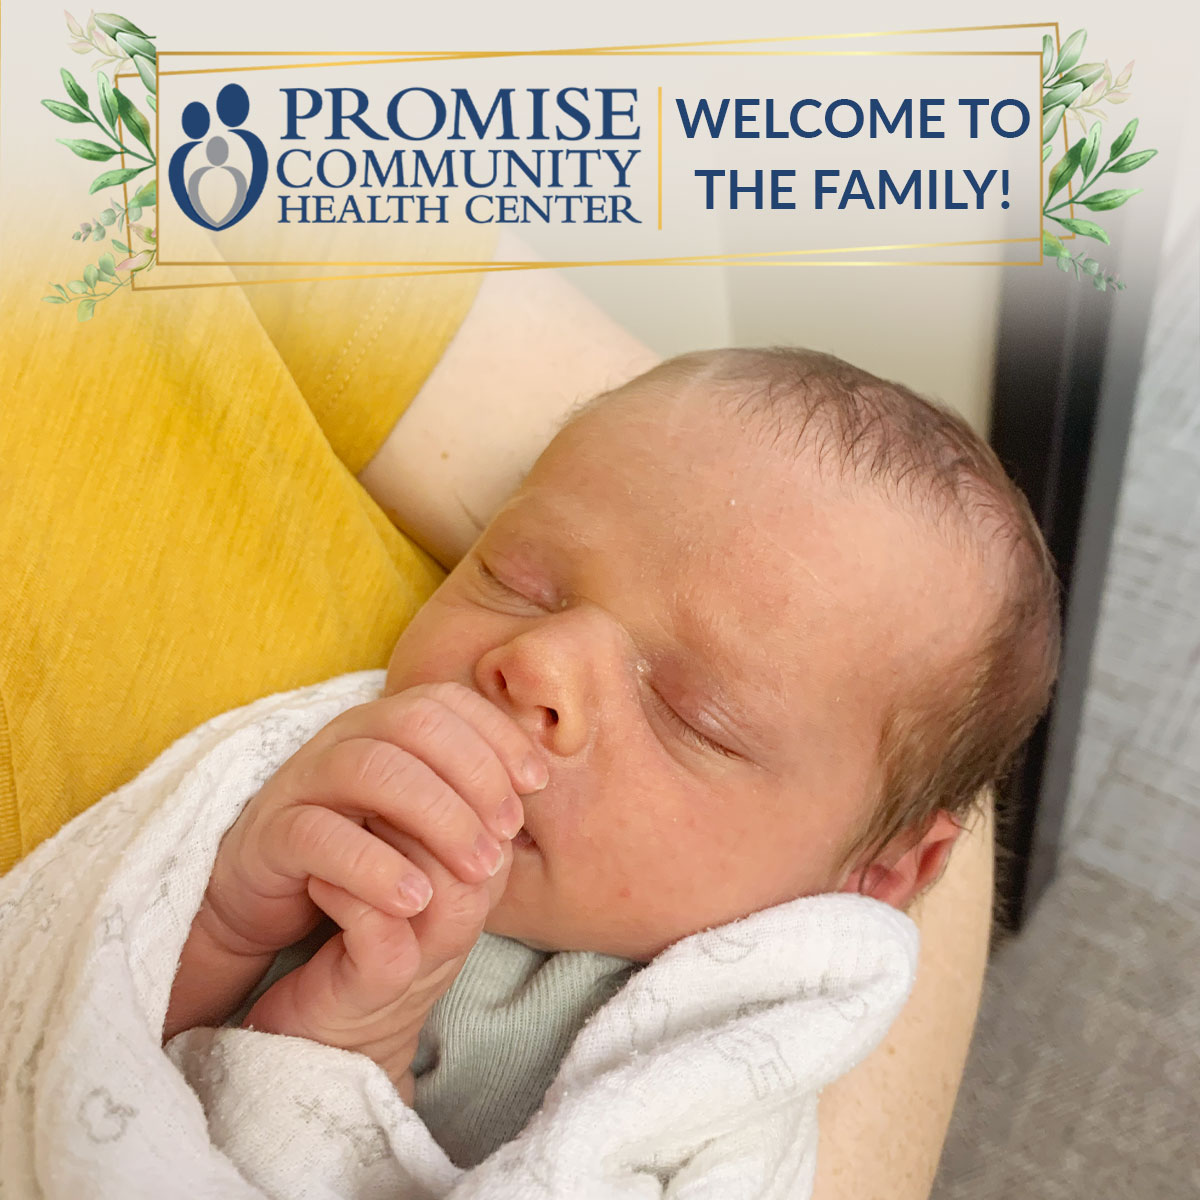 Home birth in Orange City, Iowa | Promise Community Health Center in Sioux Center, Iowa | Midwives in northwest Iowa, Midwives in southeast South Dakota, Midwives in southwest Minnesota | Midwives in Sioux Falls South Dakota, Midwives in Beresford South Dakota, Midwives in Sioux City IA, Midwives in LeMars IA, Midwives in Worthington MN, Midwives in Iowa, Midwives in South Dakota, Midwives in Minnesota